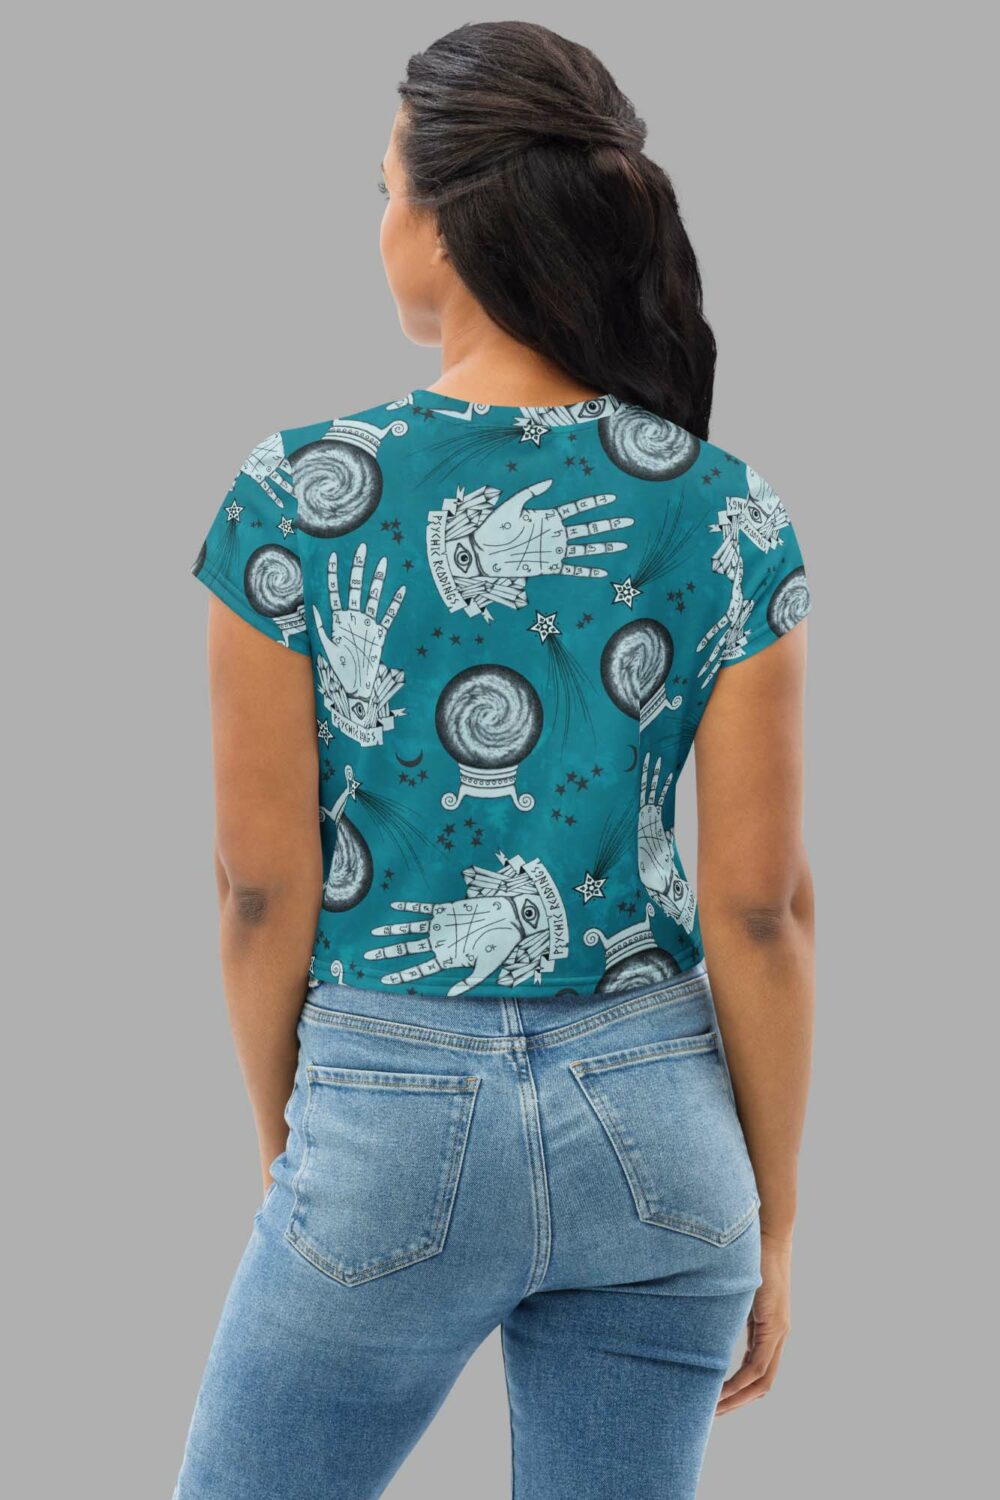 cosmic drifters clairvoyant print crop tee back